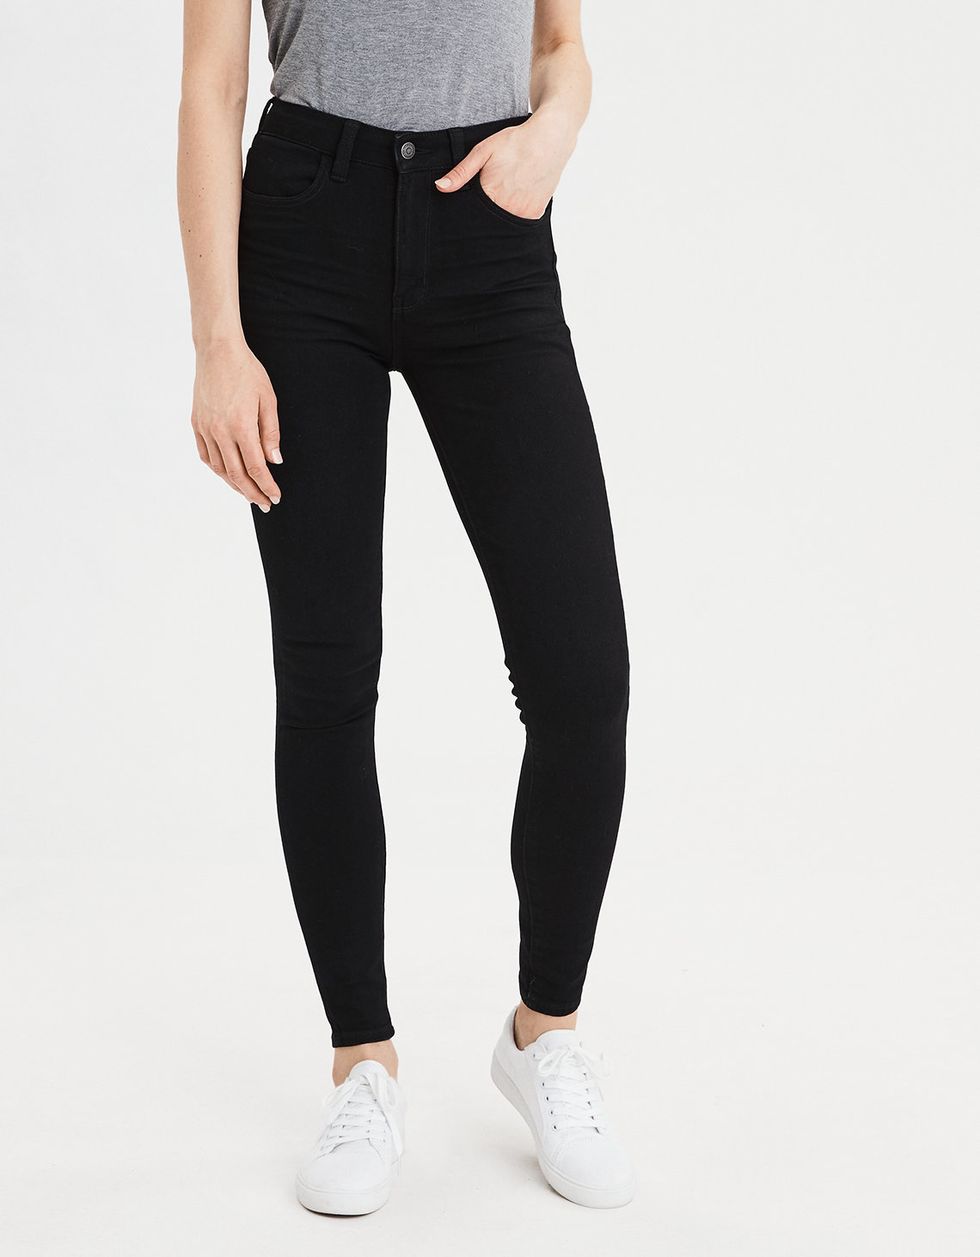 best postpartum jeans american eagle 0 Motherly